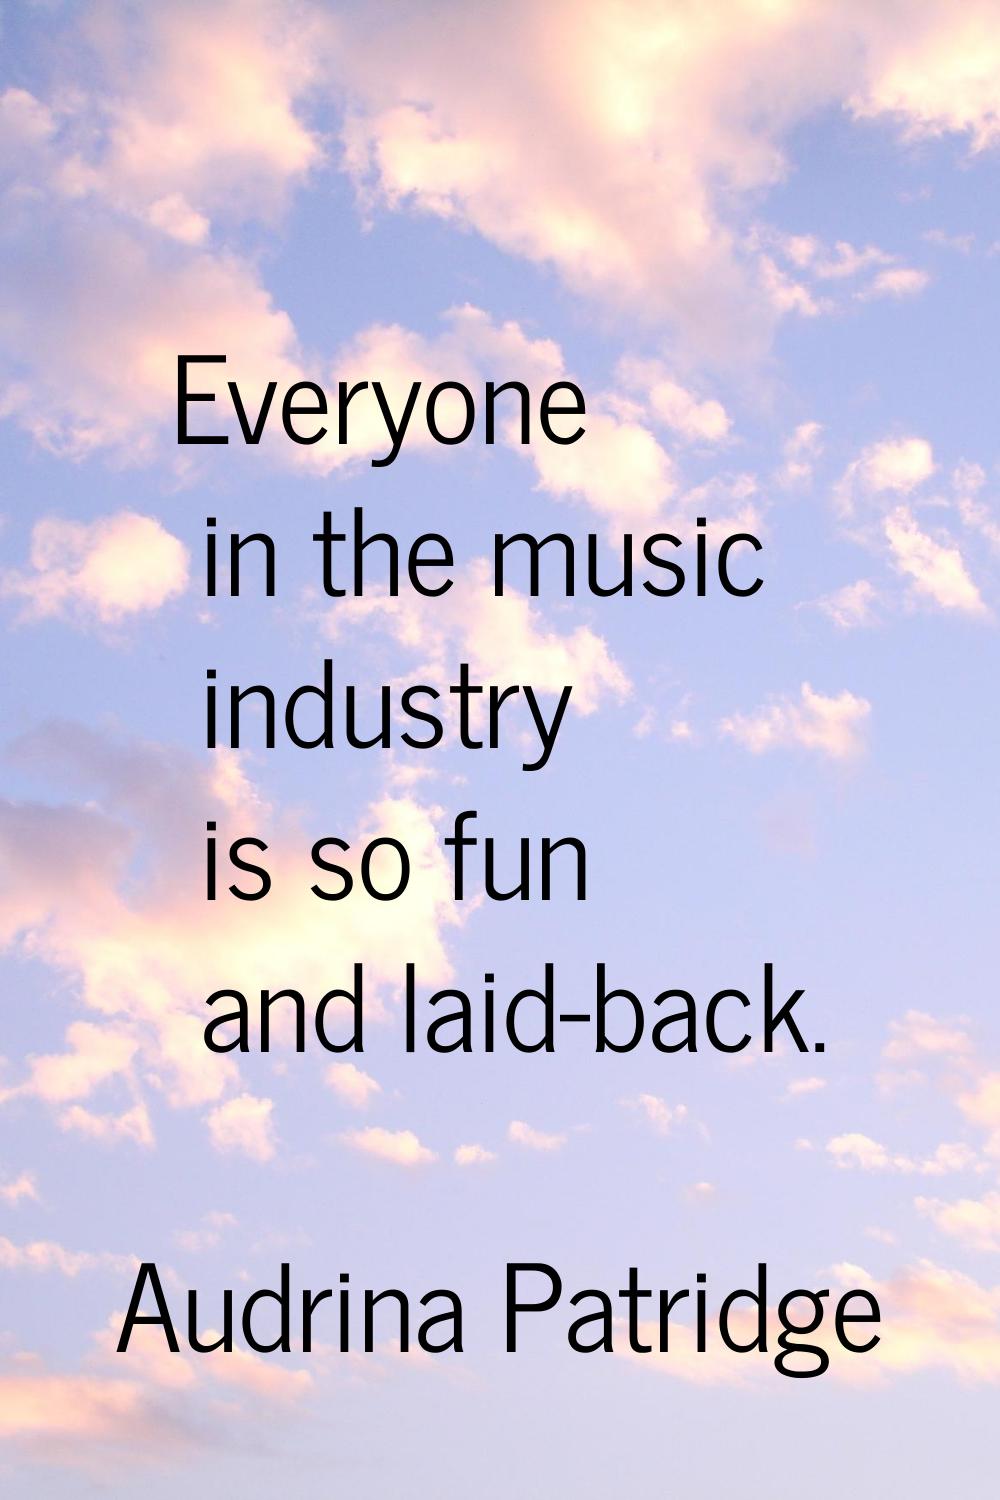 Everyone in the music industry is so fun and laid-back.